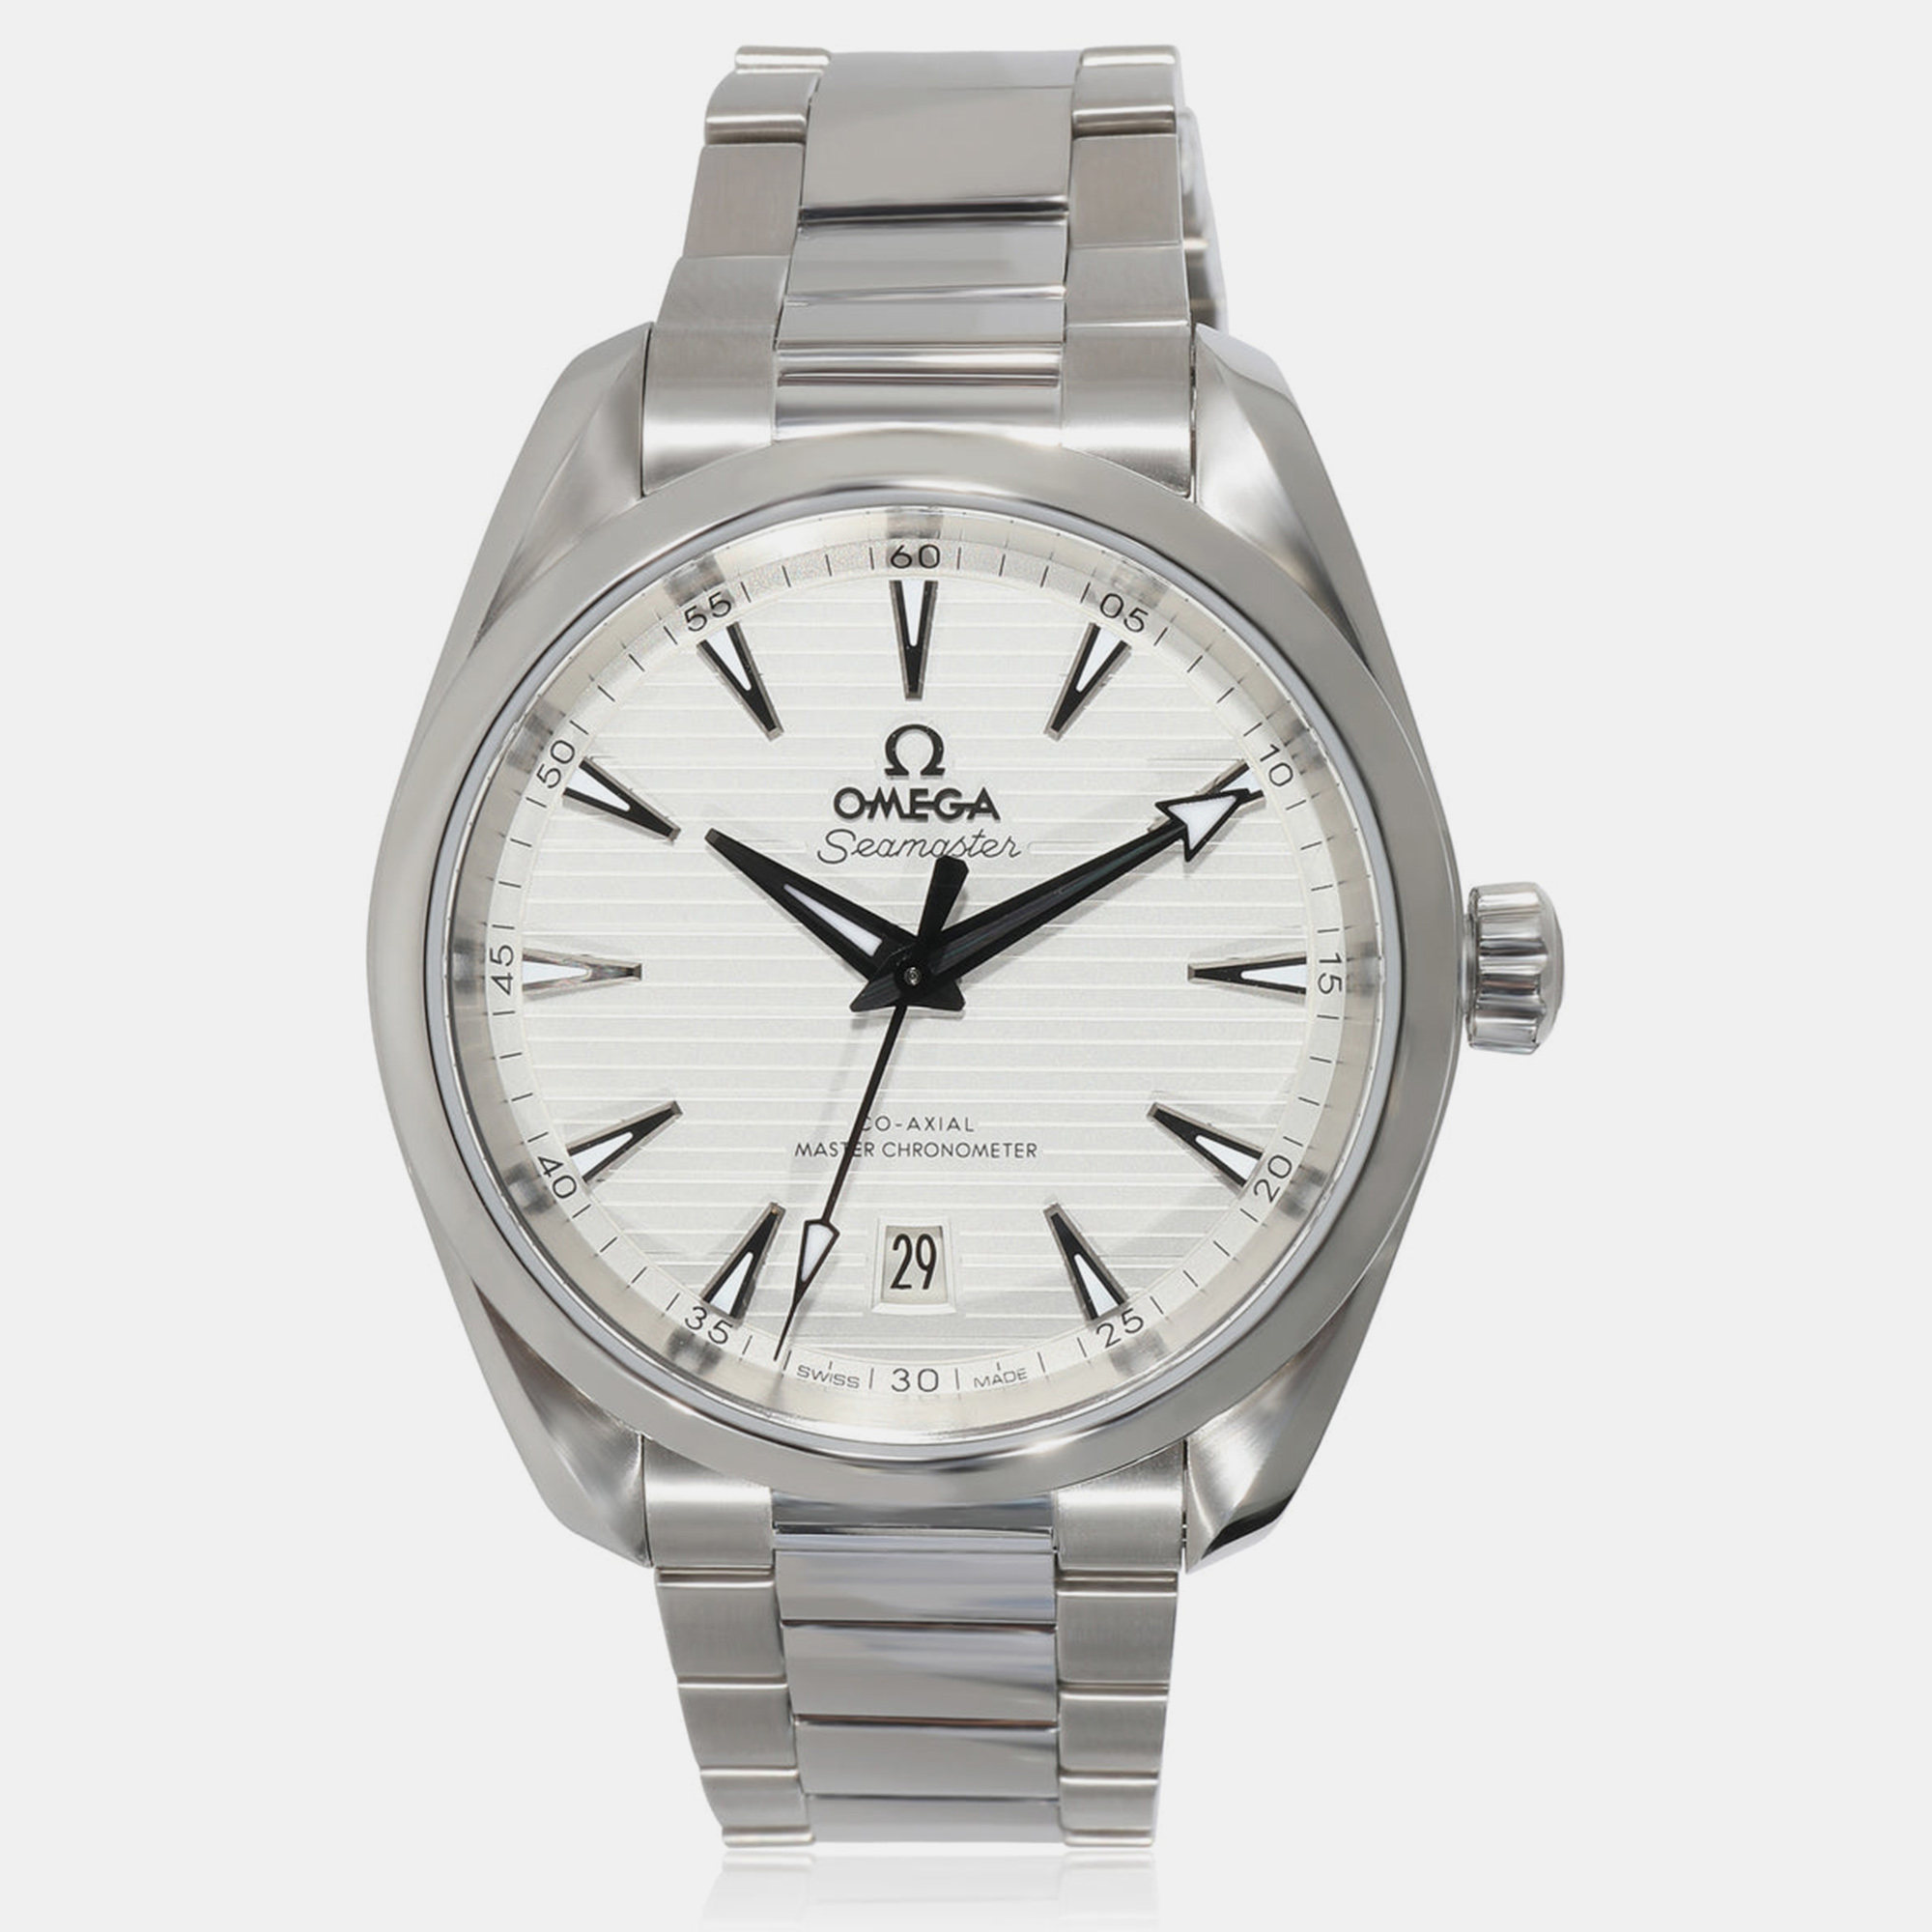 Omega silver stainless steel seamaster aqua terra 220.10.38.20.02.001 automatic men's wristwatch 38 mm